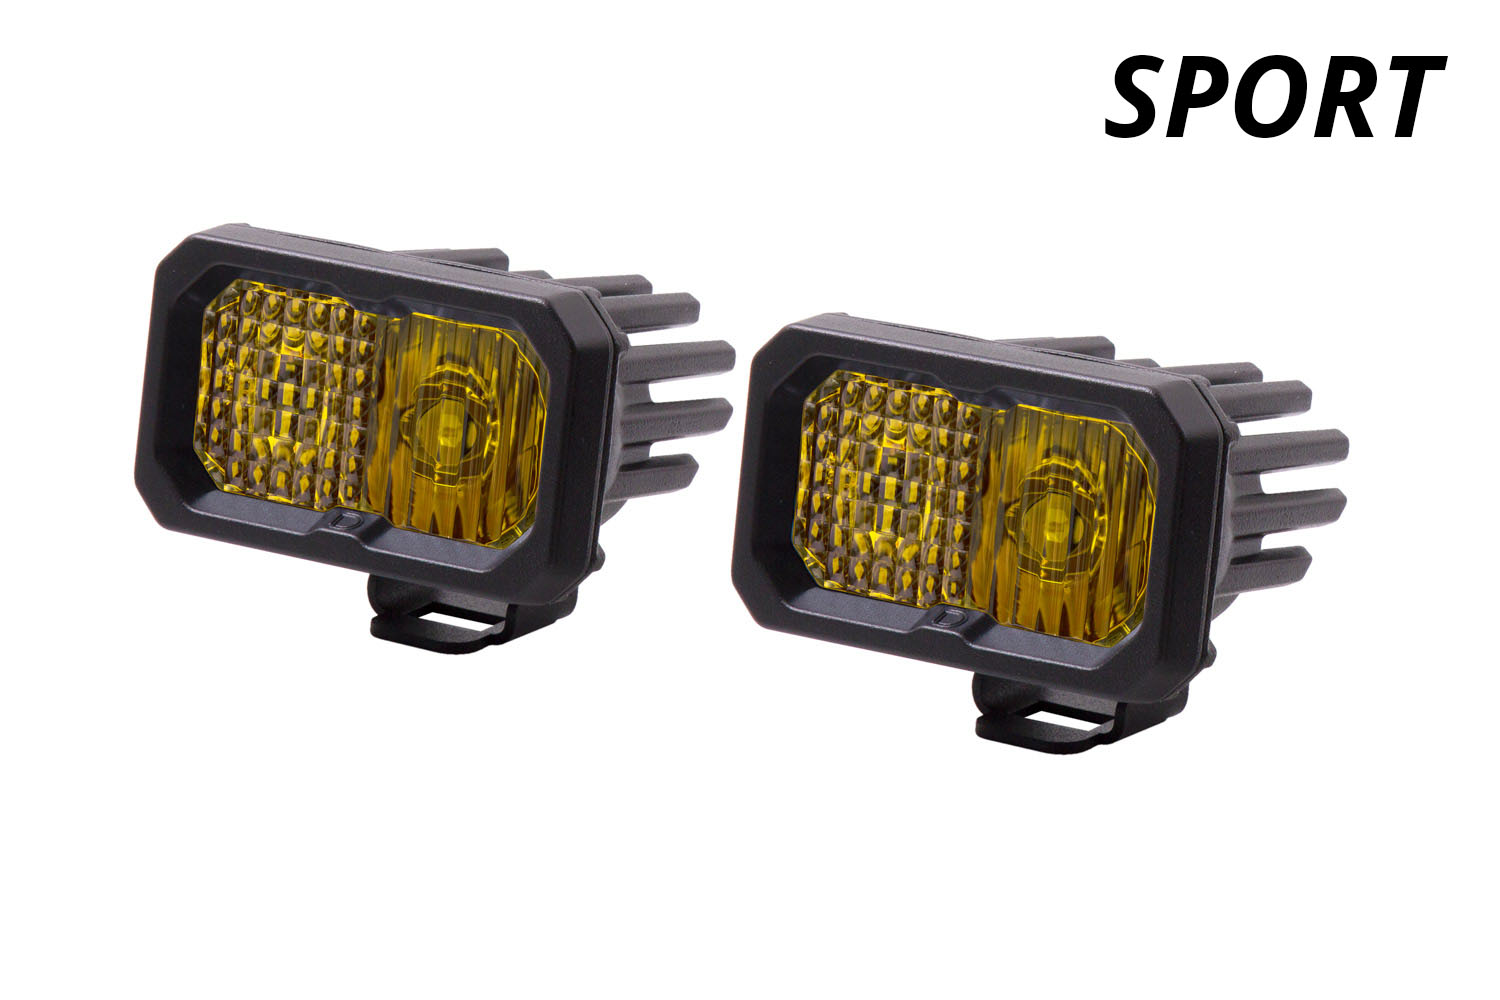 Diode Dynamics Stage Series 2 Inch LED Pod, Sport Yellow Fog Standard ABL Pair - Click Image to Close